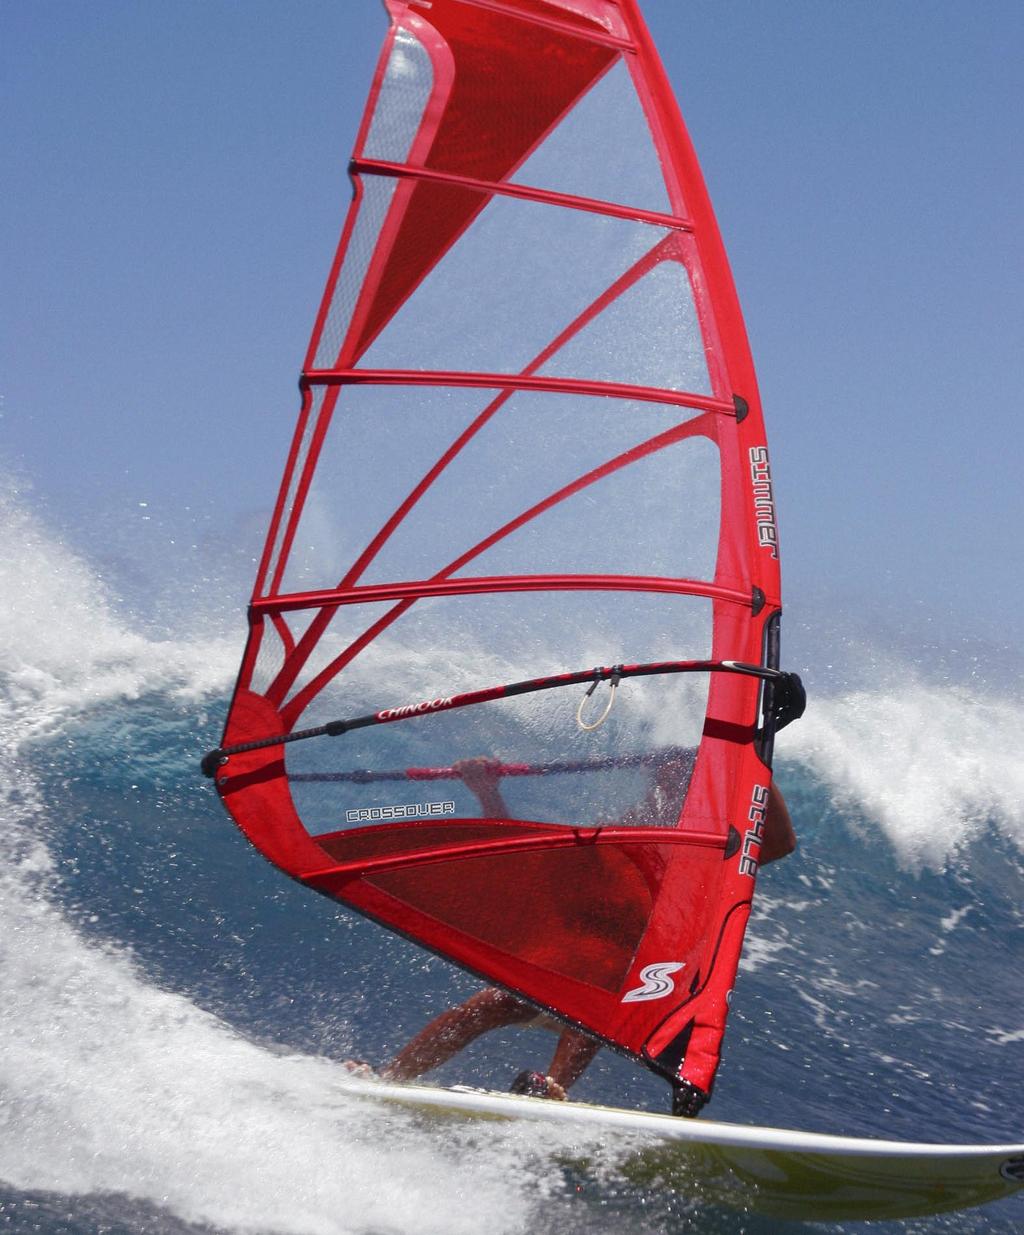 PHOTO: DARRELL WONG. RIDER: ASCANIO D ASCANIO CROSSOVER 2006 - ONSHORE WAVE POWERHOUSE The CROSSOVER model has been a worldwide success and test winner for many years.